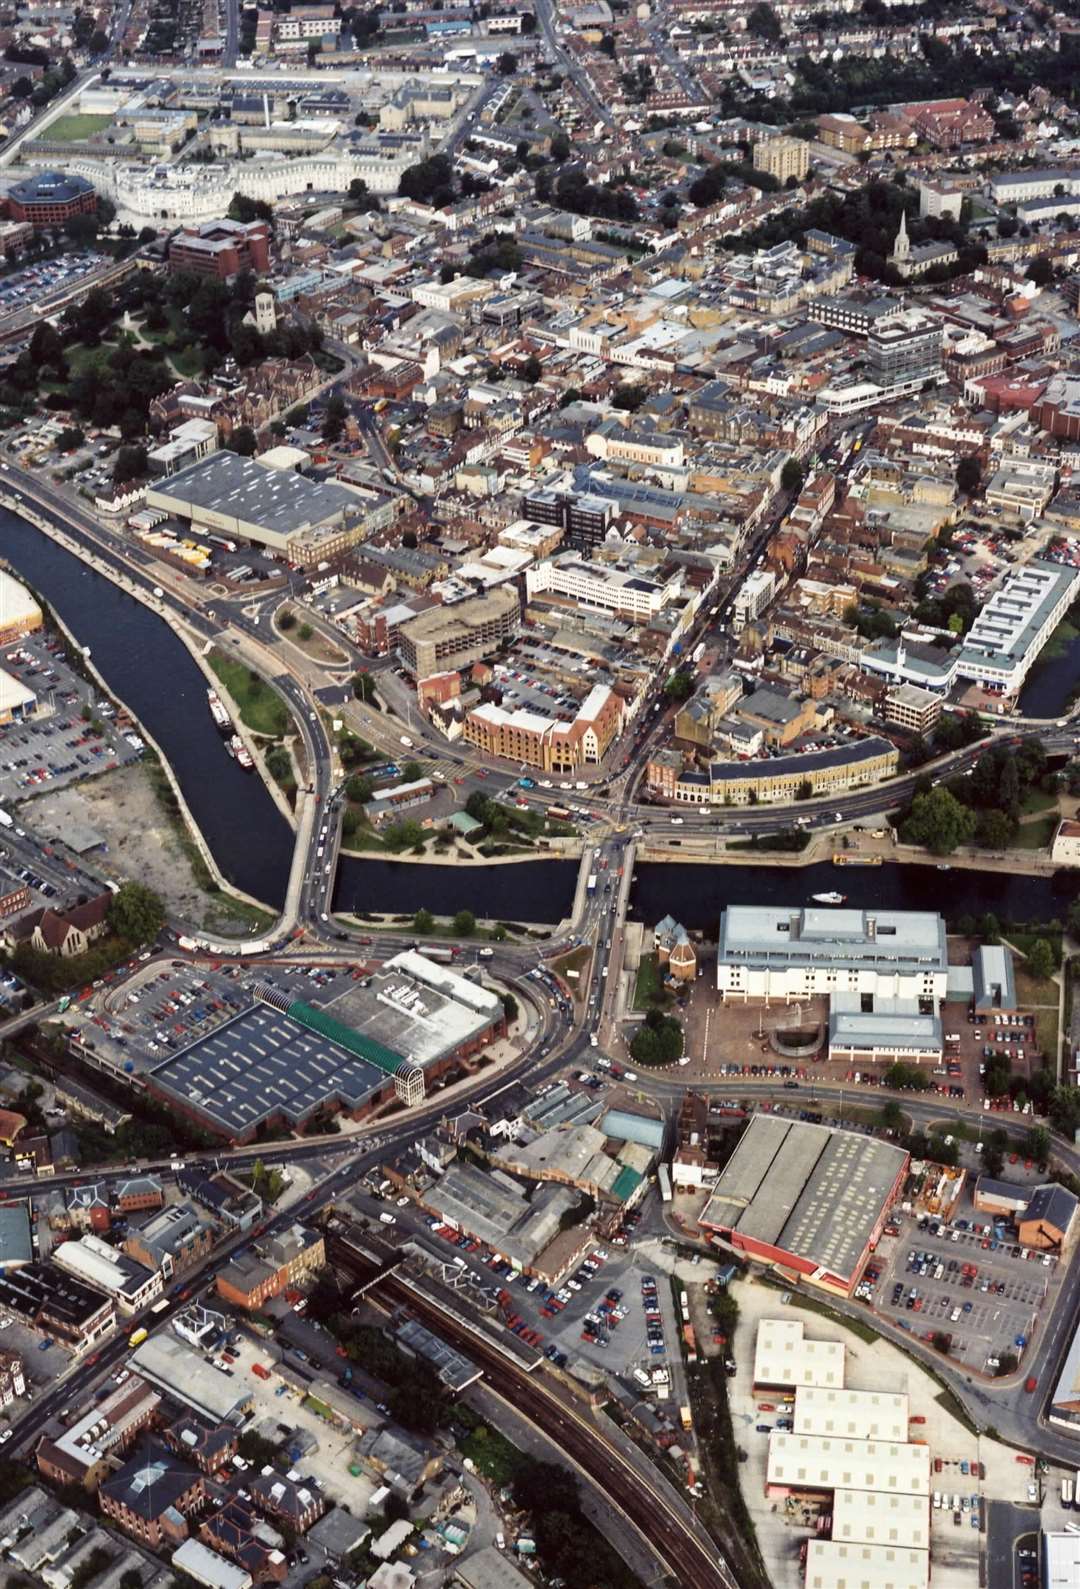 Another aerial of the heart of the Maidstone